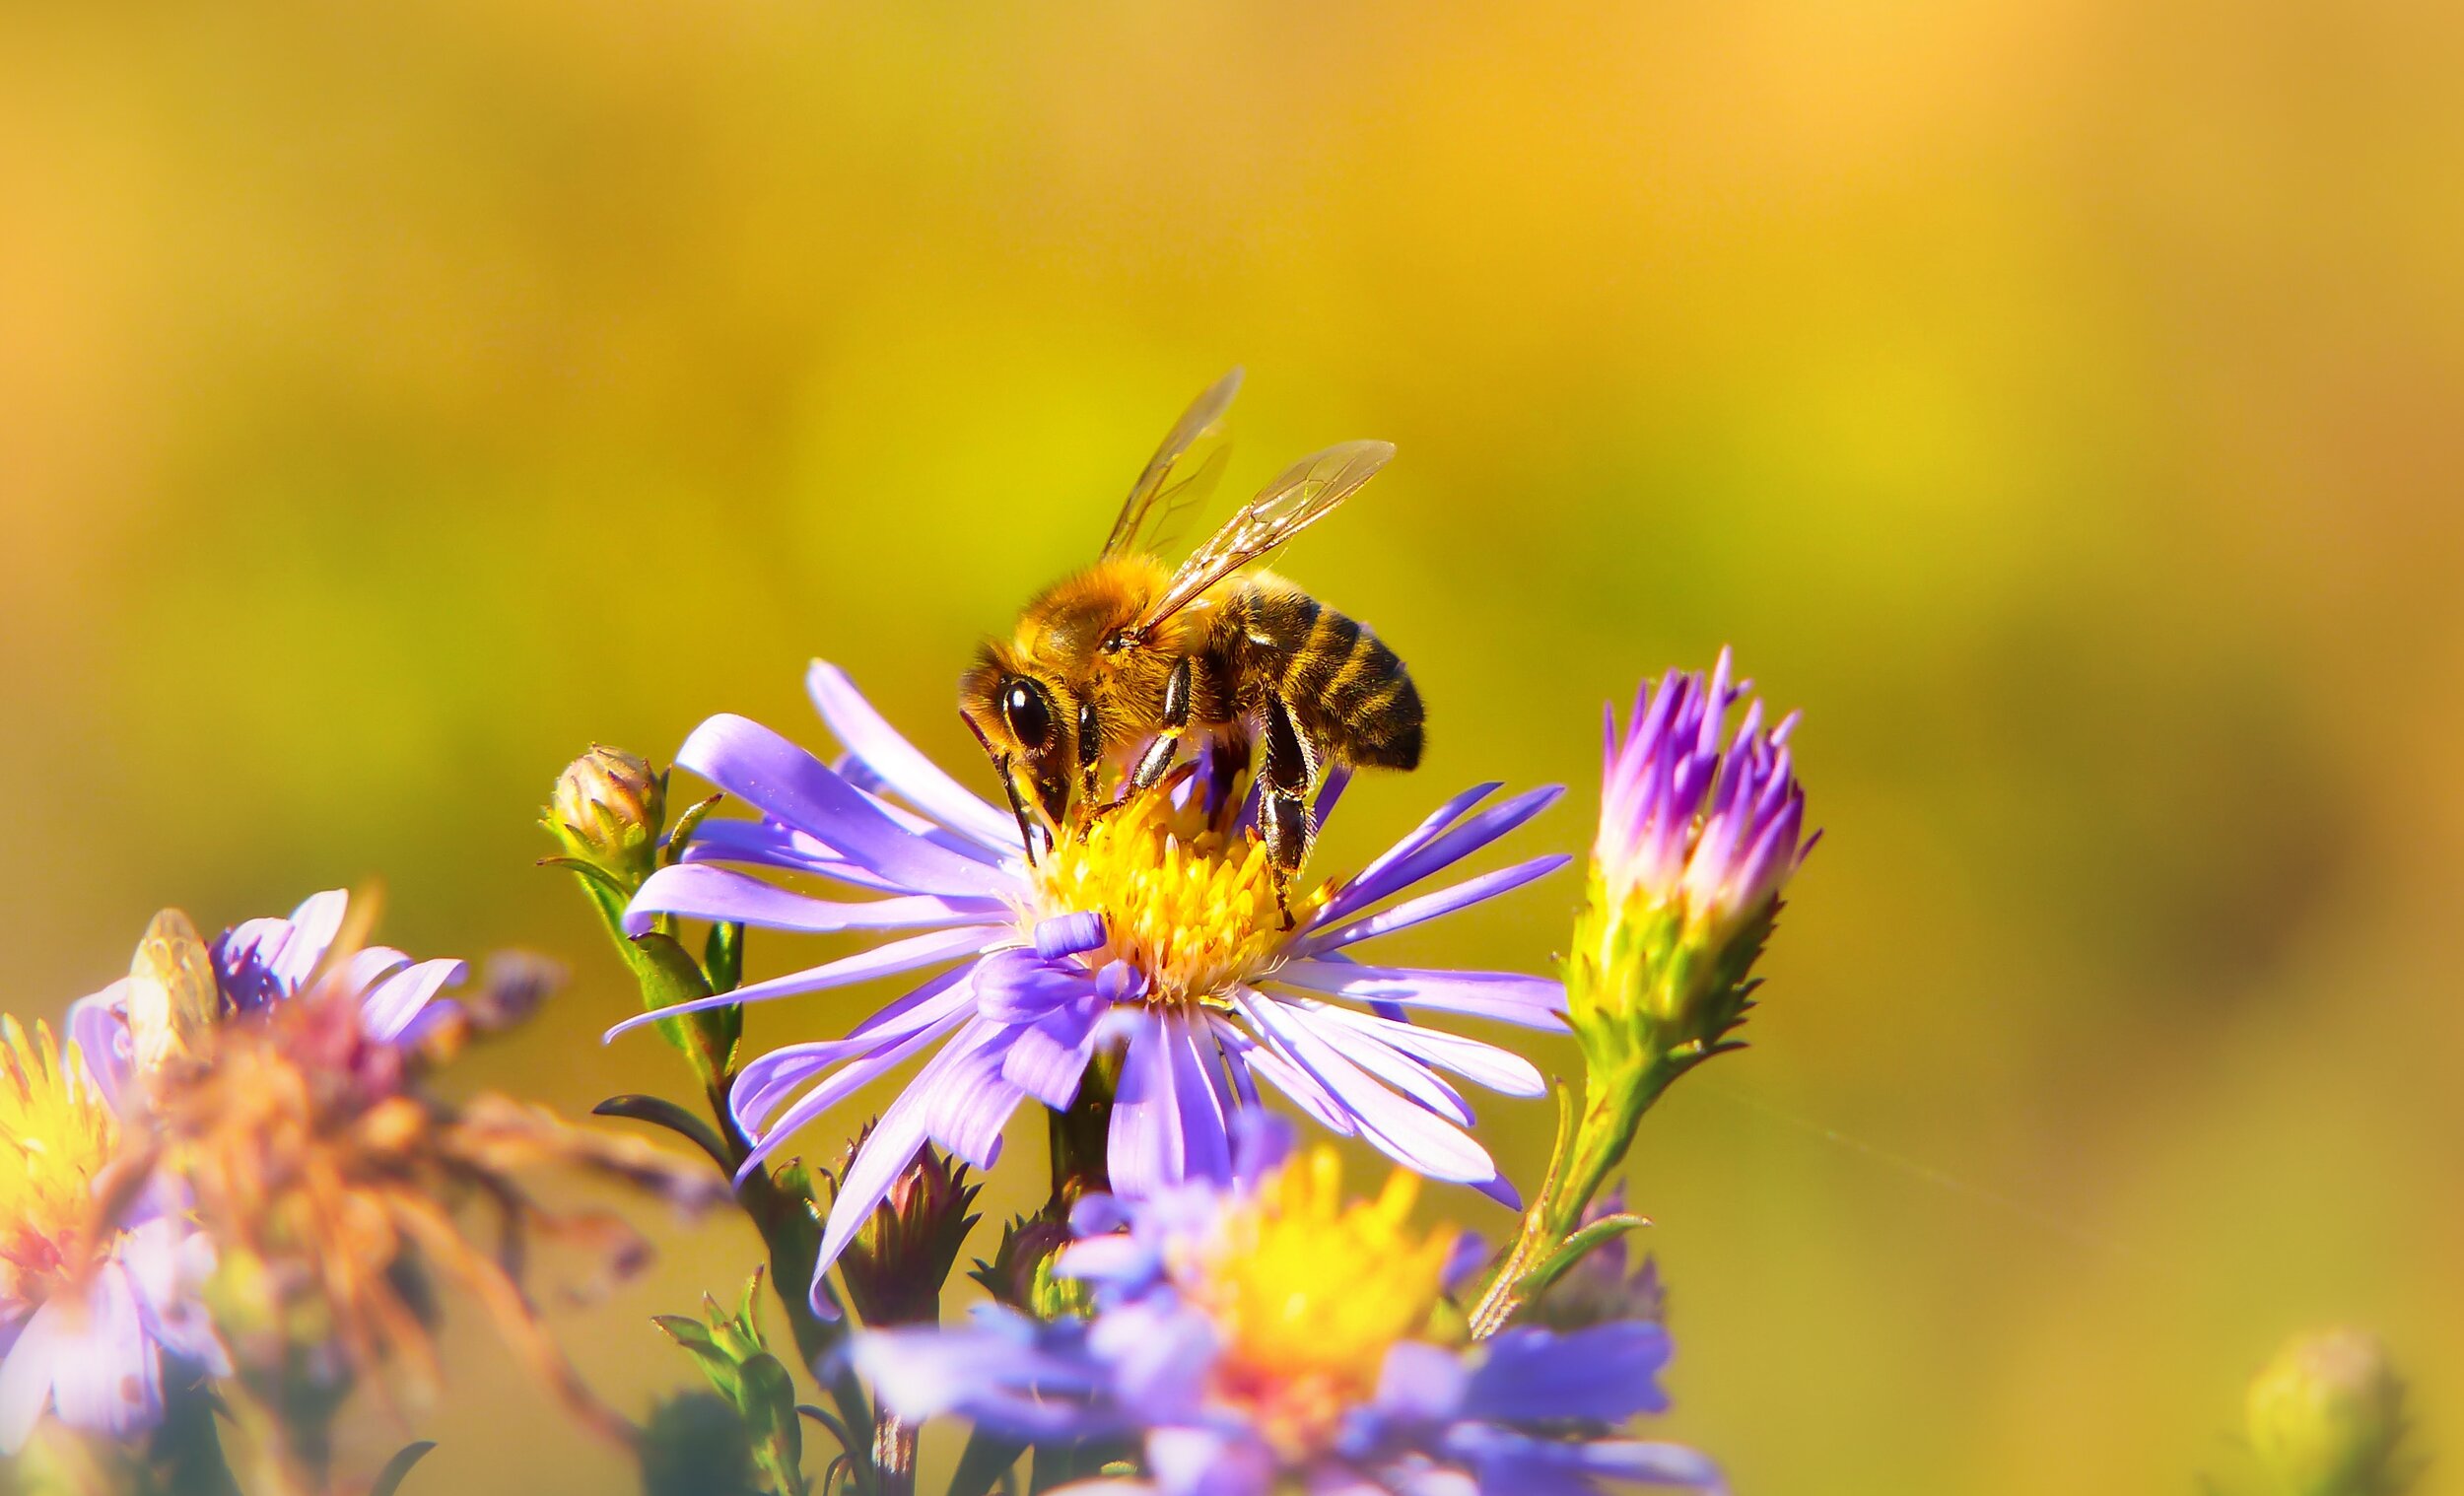 In addition, pesticides are responsible for the widespread death of bee colonies - one of nature’s most important pollinators.